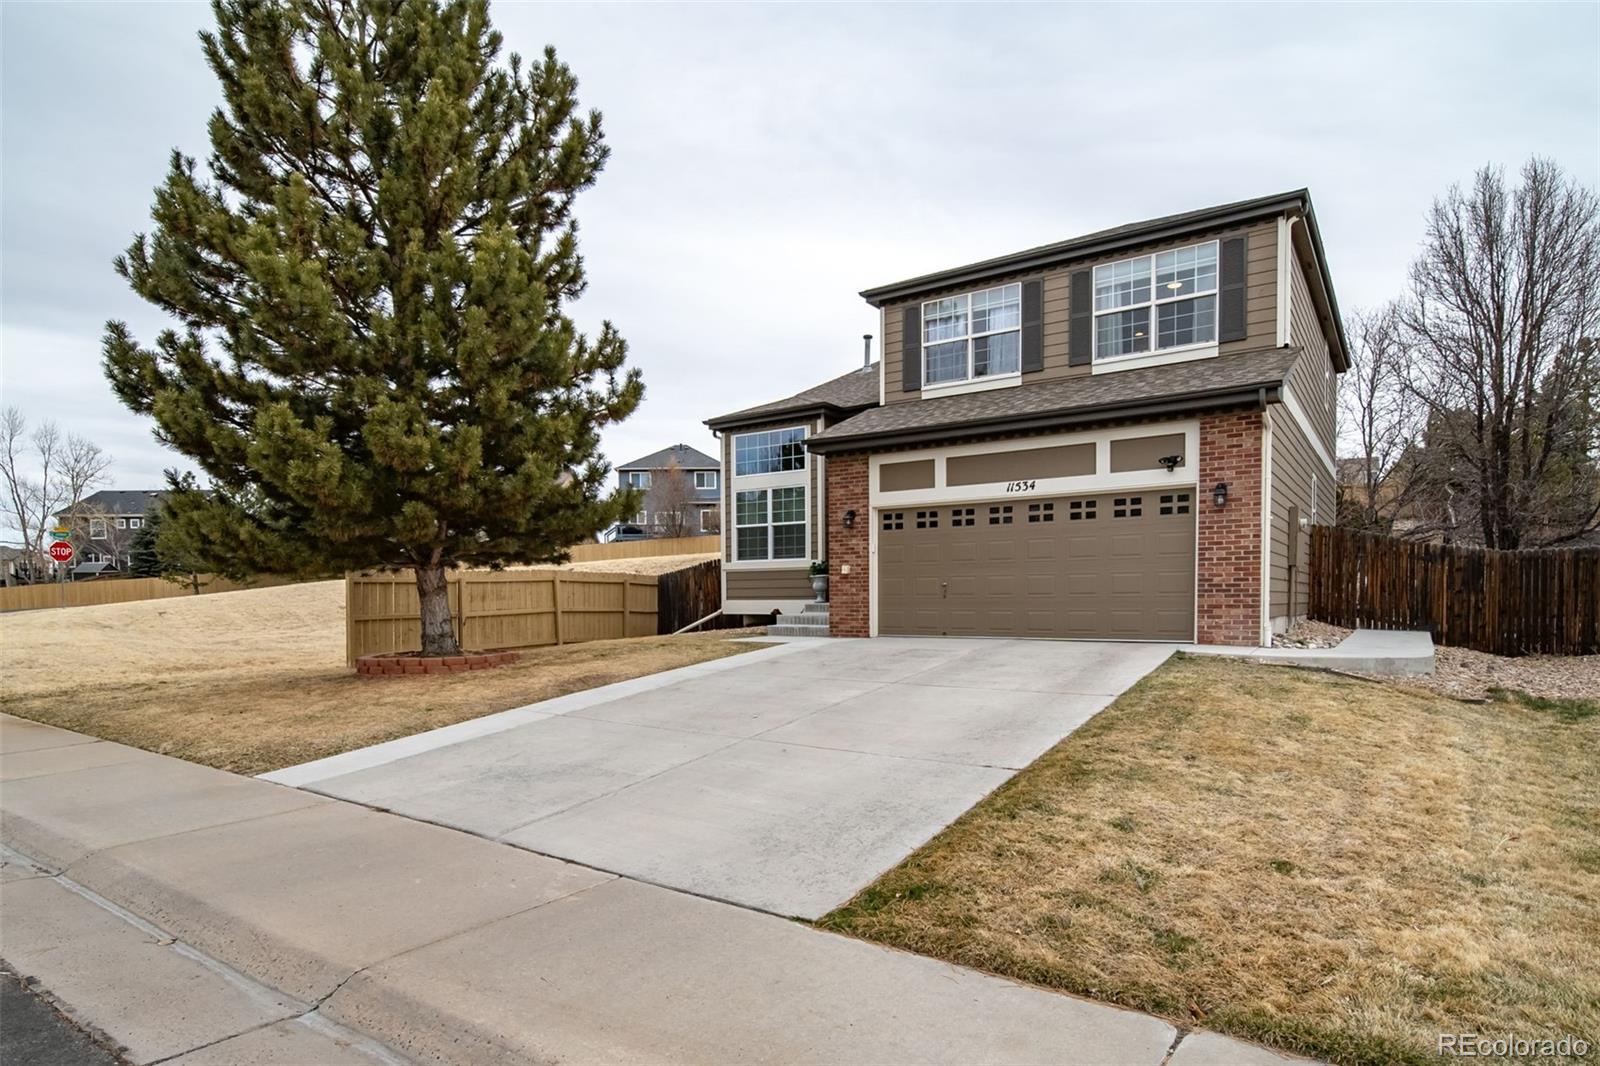 Report Image for 11534  Maplewood Lane,Parker, Colorado